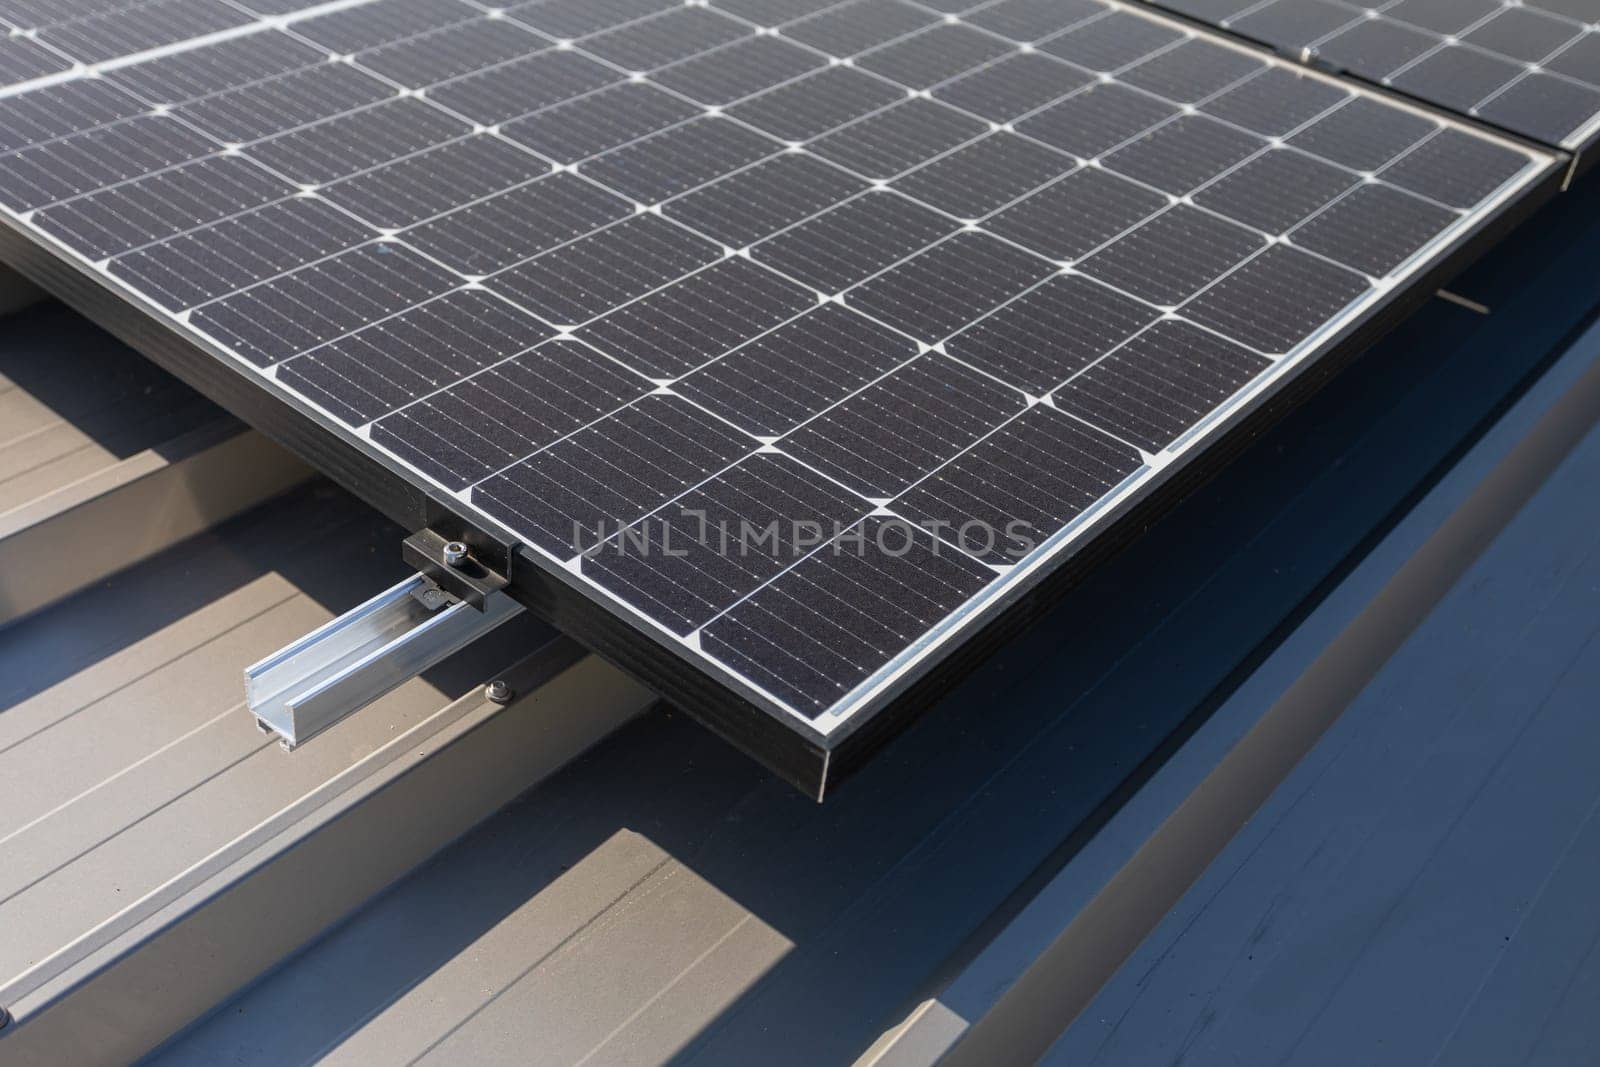 A system for obtaining energy from the sun using photovoltaic panels that were mounted on the roof of the building to trapezoidal sheet metal.